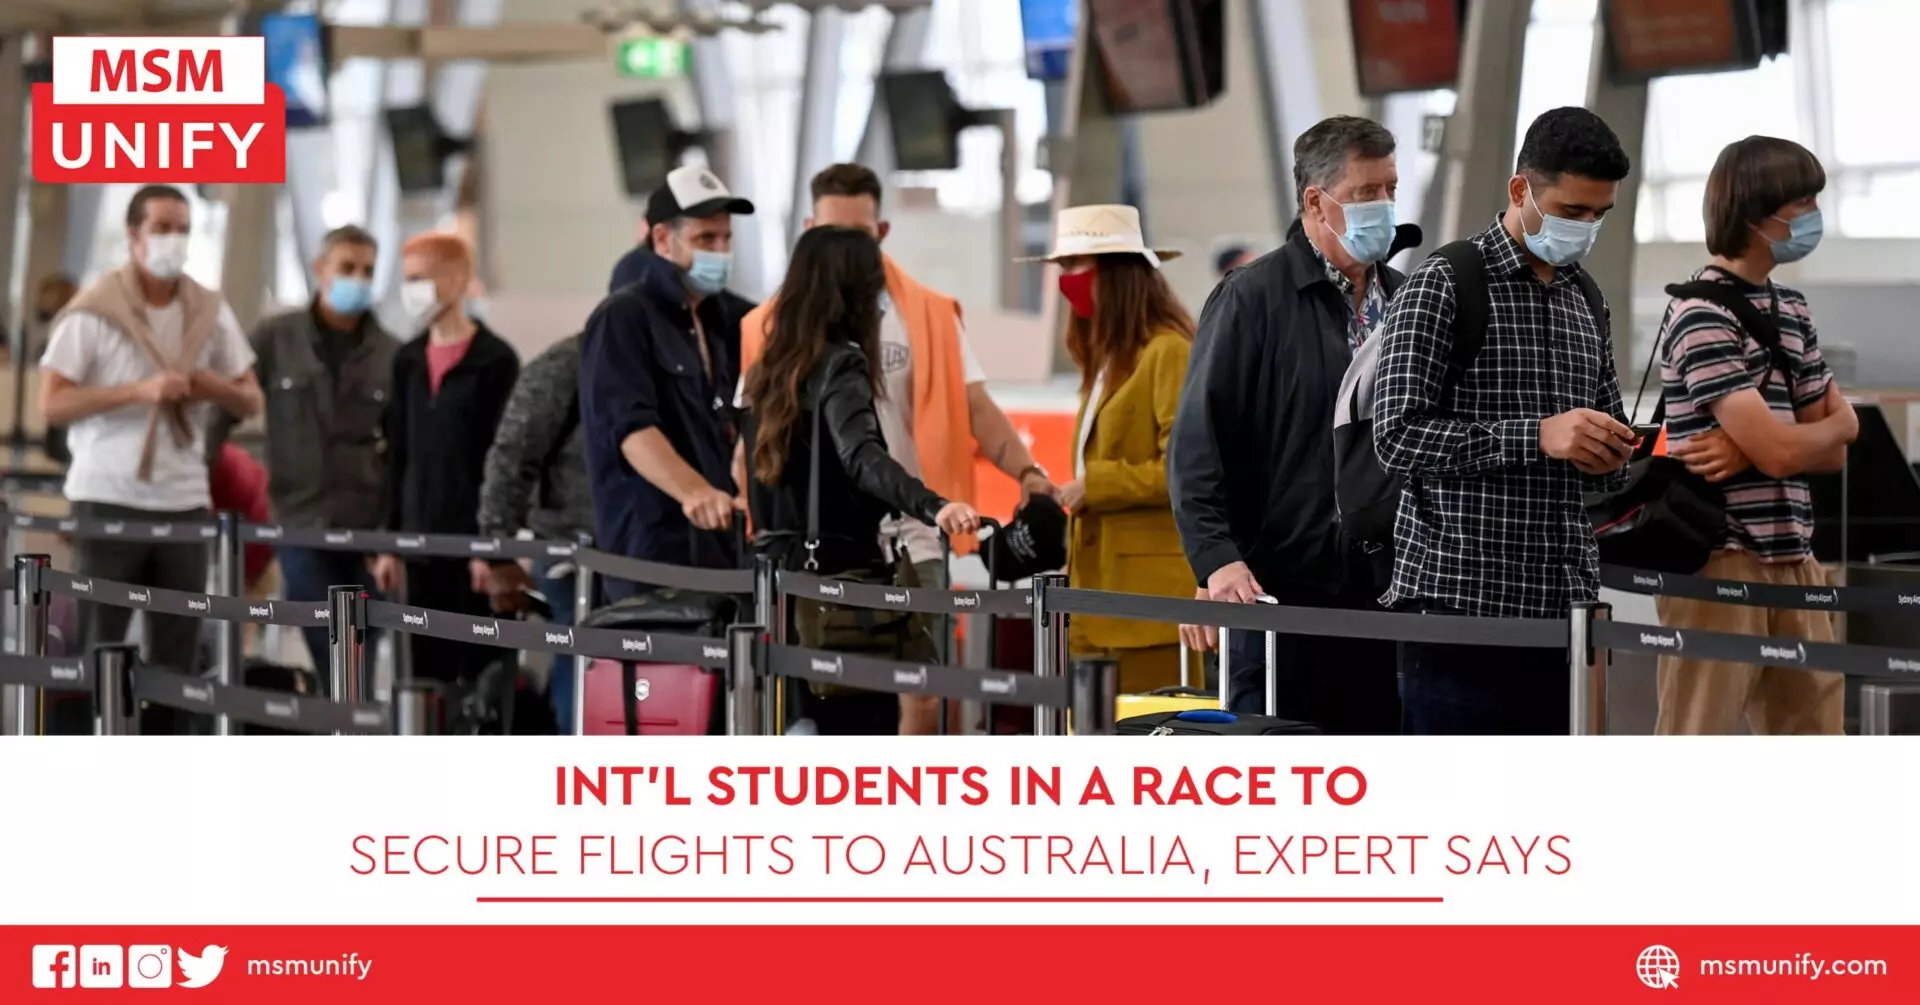 Intl Students in a Race To Secure Flights to Australia Expert Says scaled 1